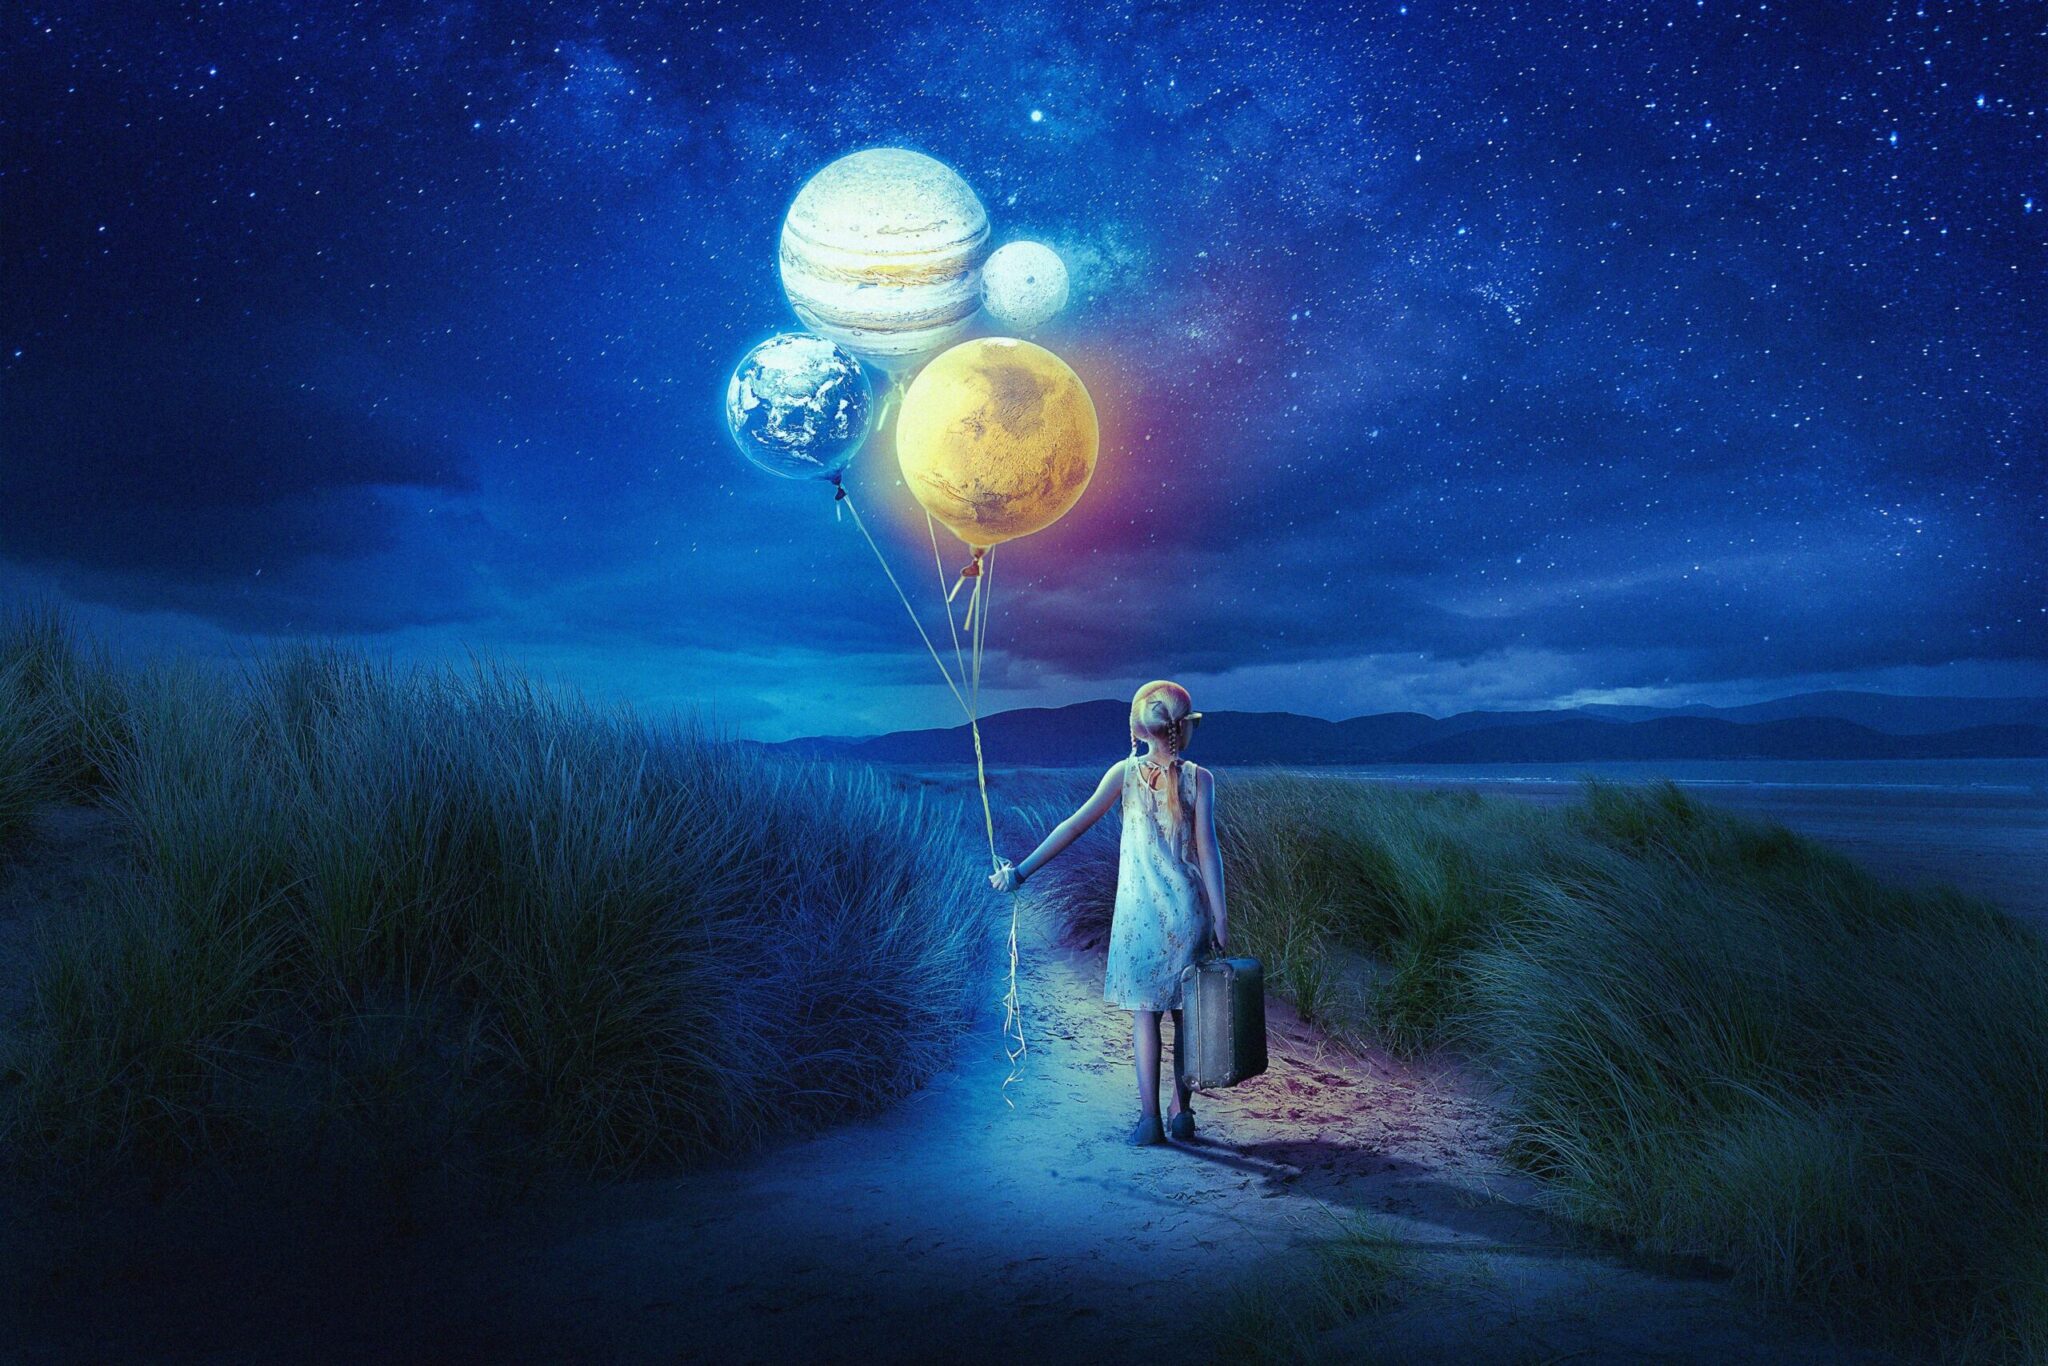 A young person with a suitcase walking down a road with balloons that are actually planets demonstrating the notion of a different world when there is not just one right or wrong